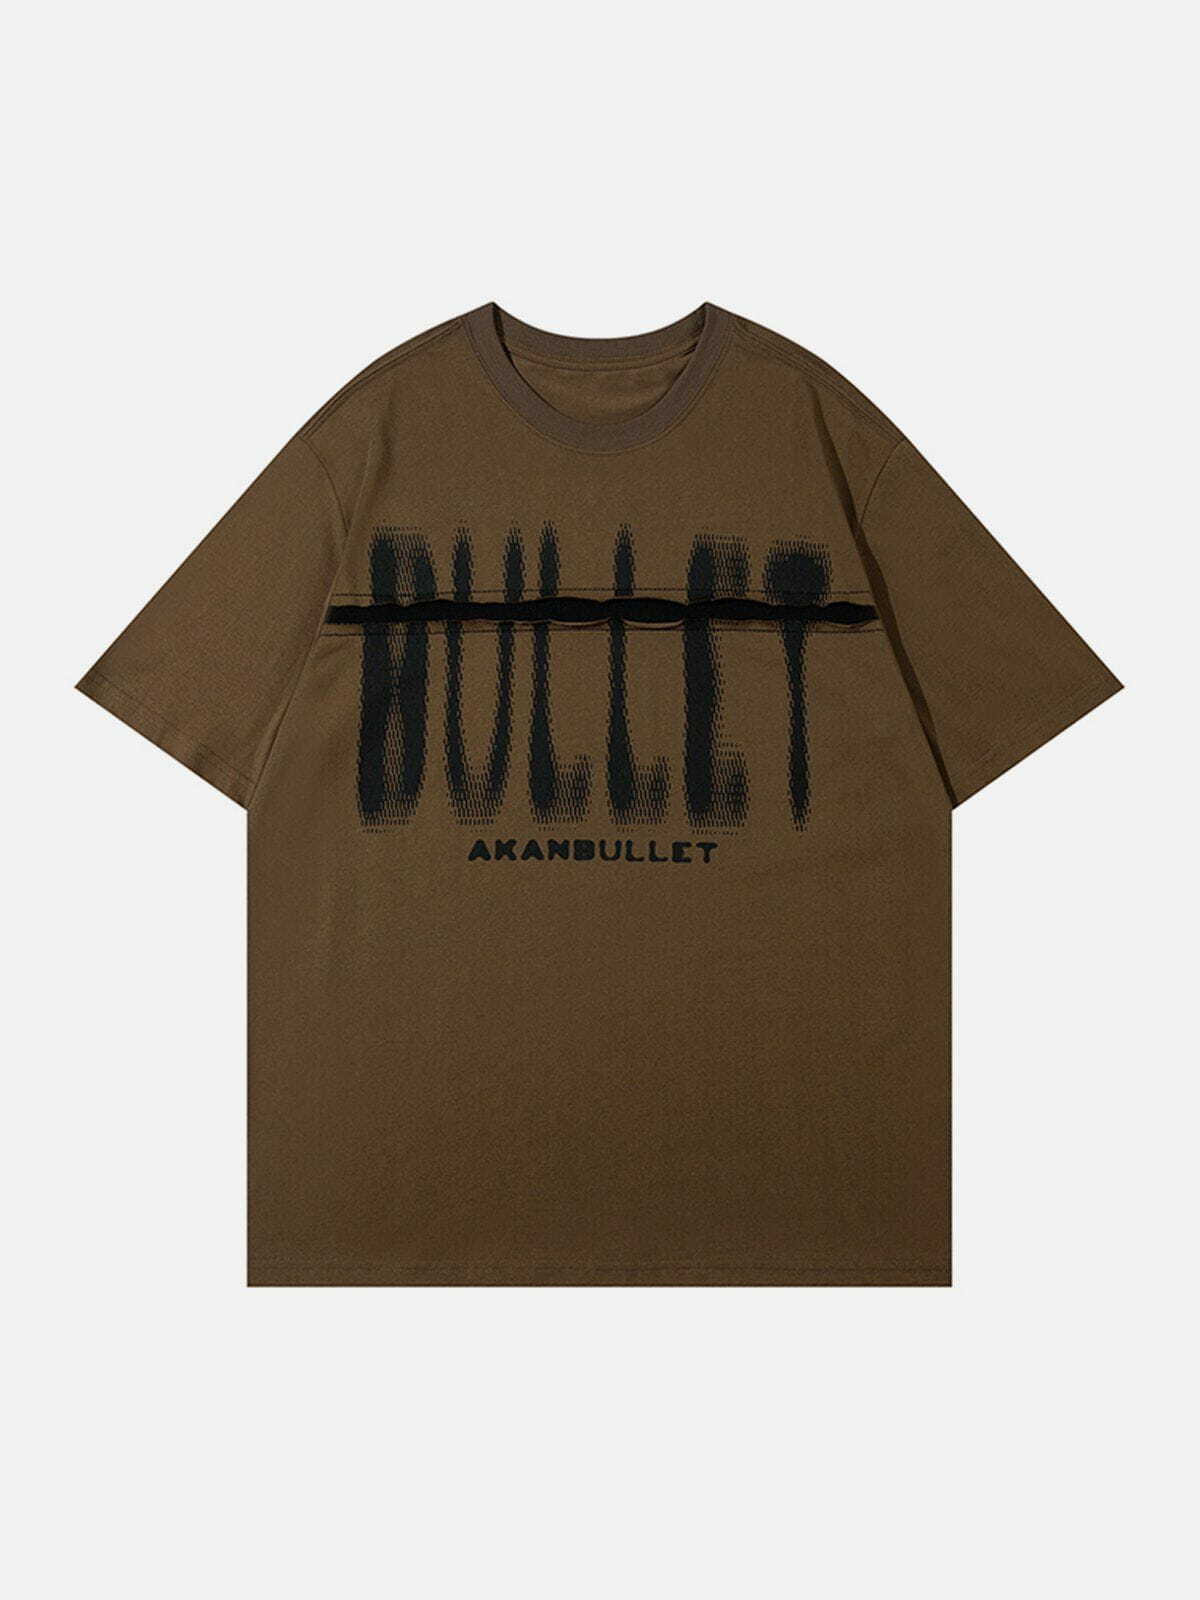 cut bullet graphic tee edgy streetwear statement 7109